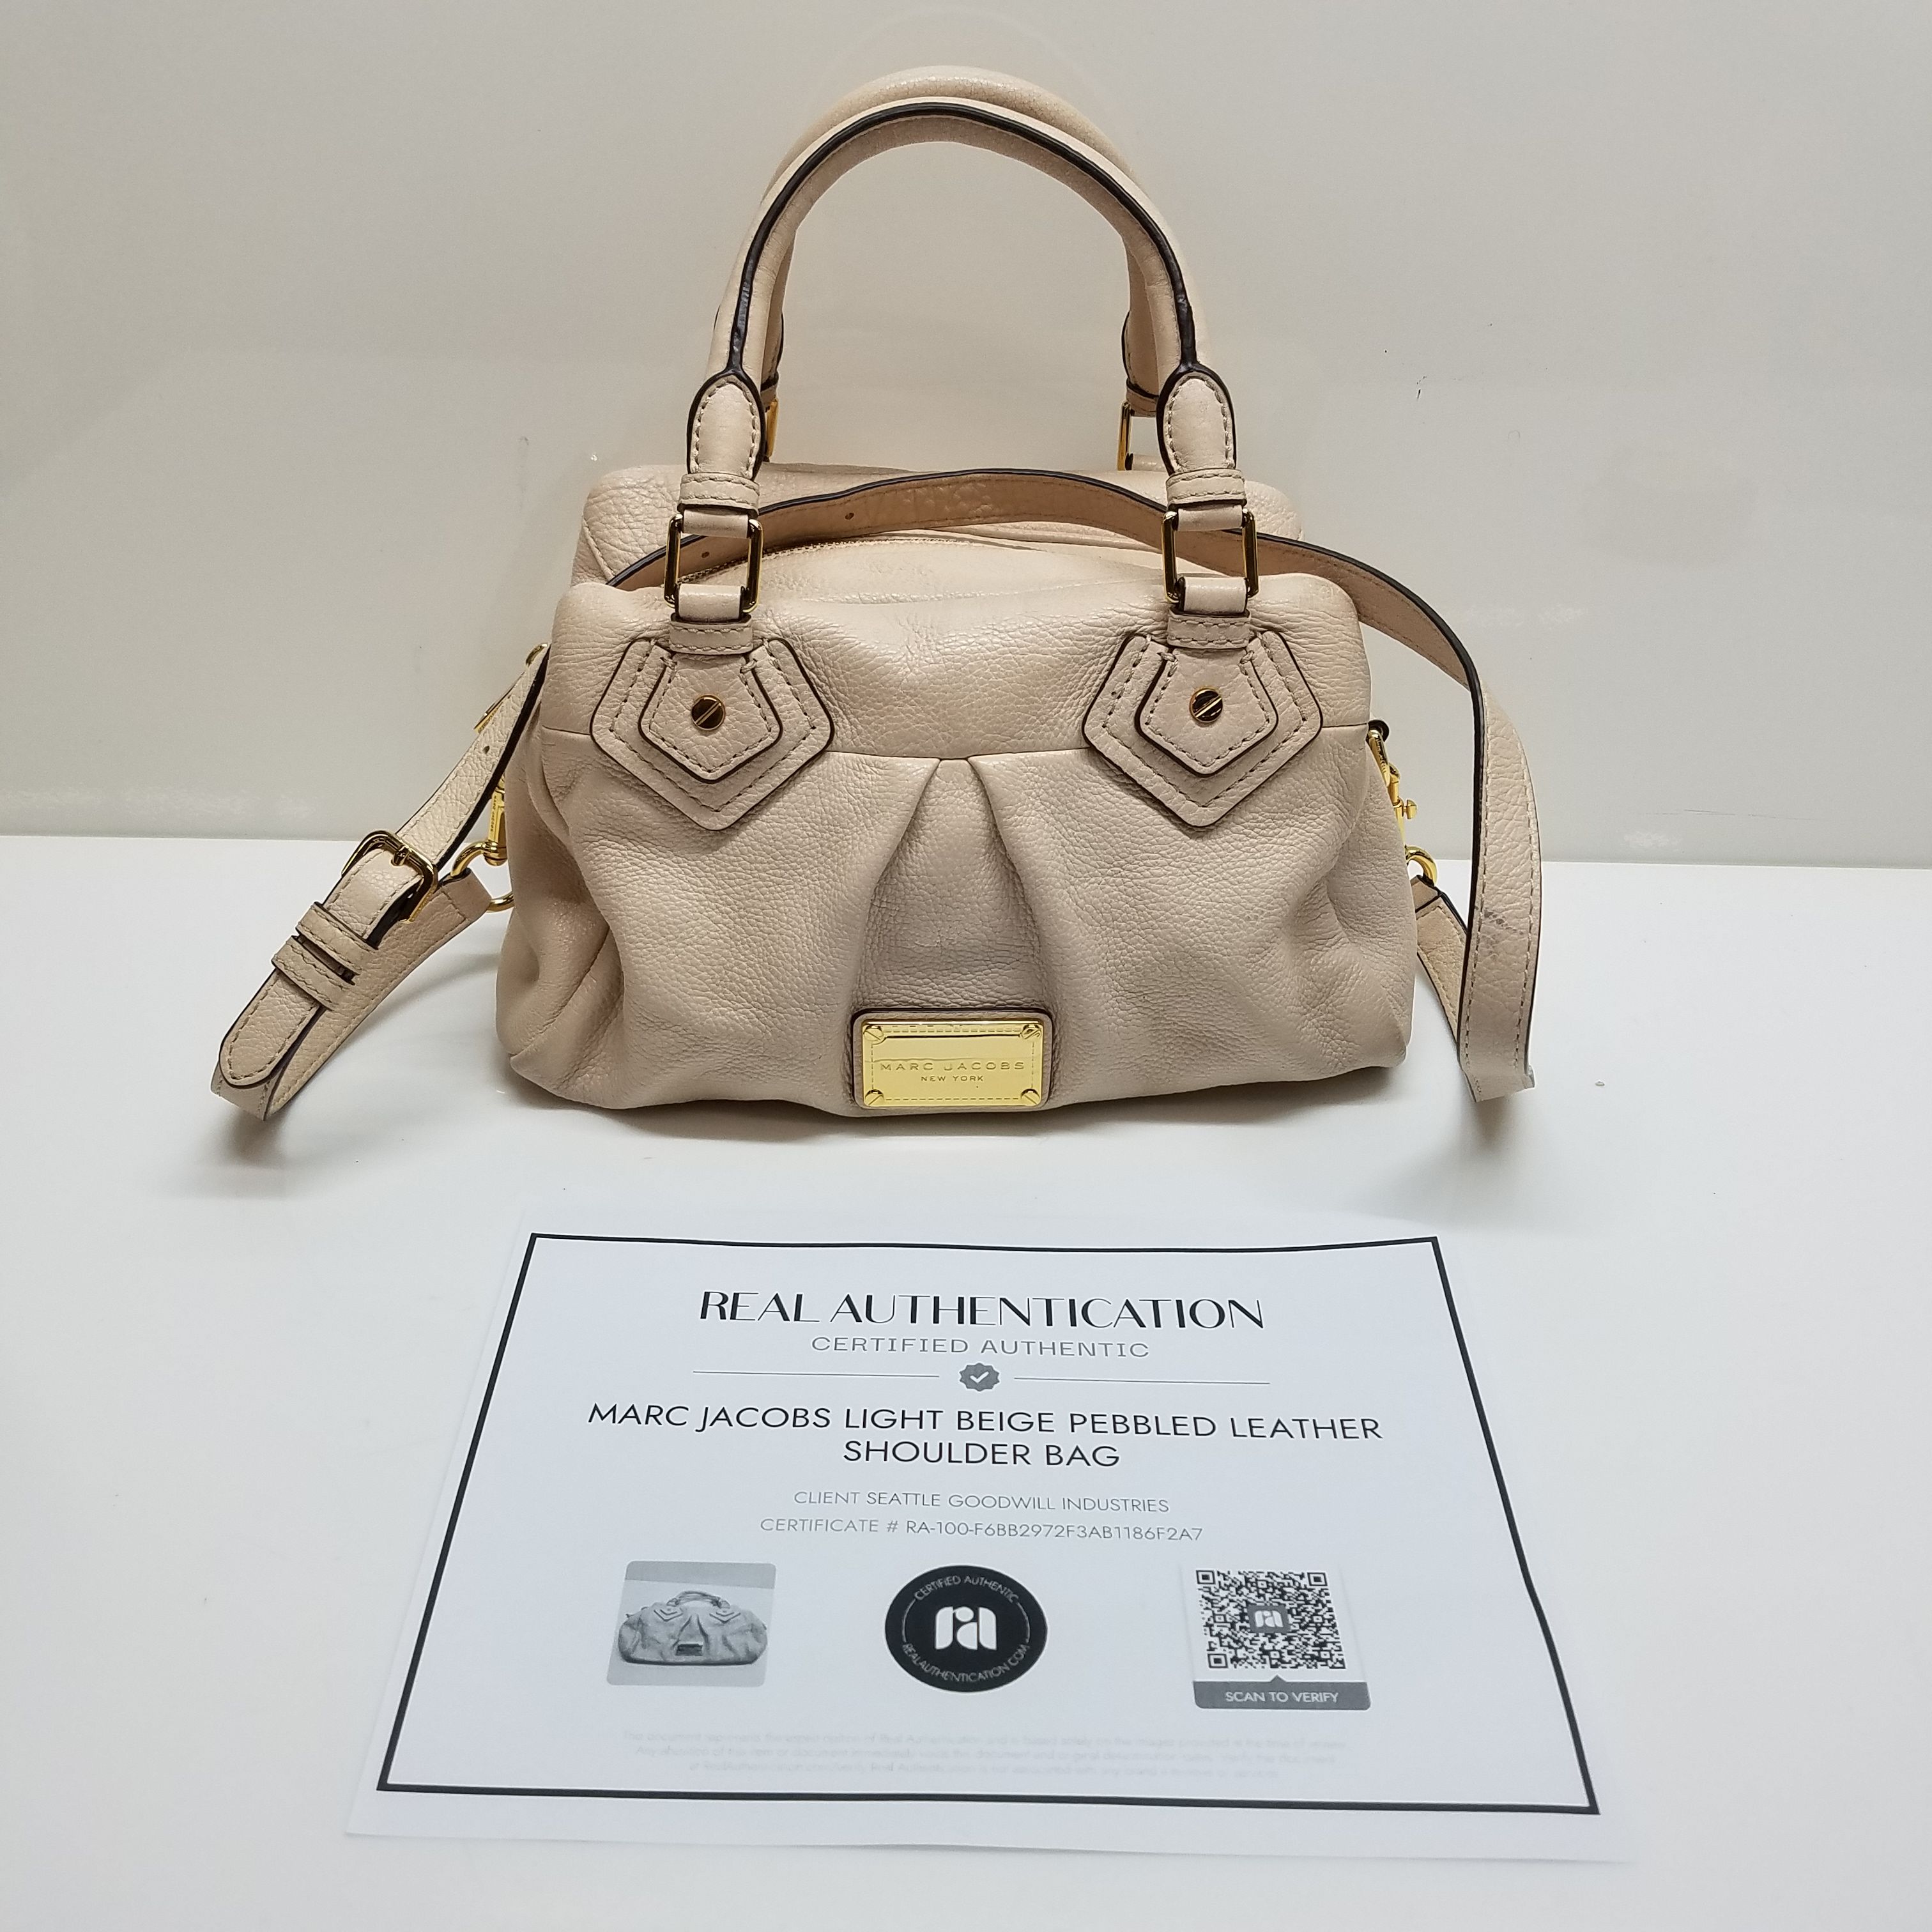 Marc Jacobs - Authenticated Handbag - Leather Beige for Women, Very Good Condition